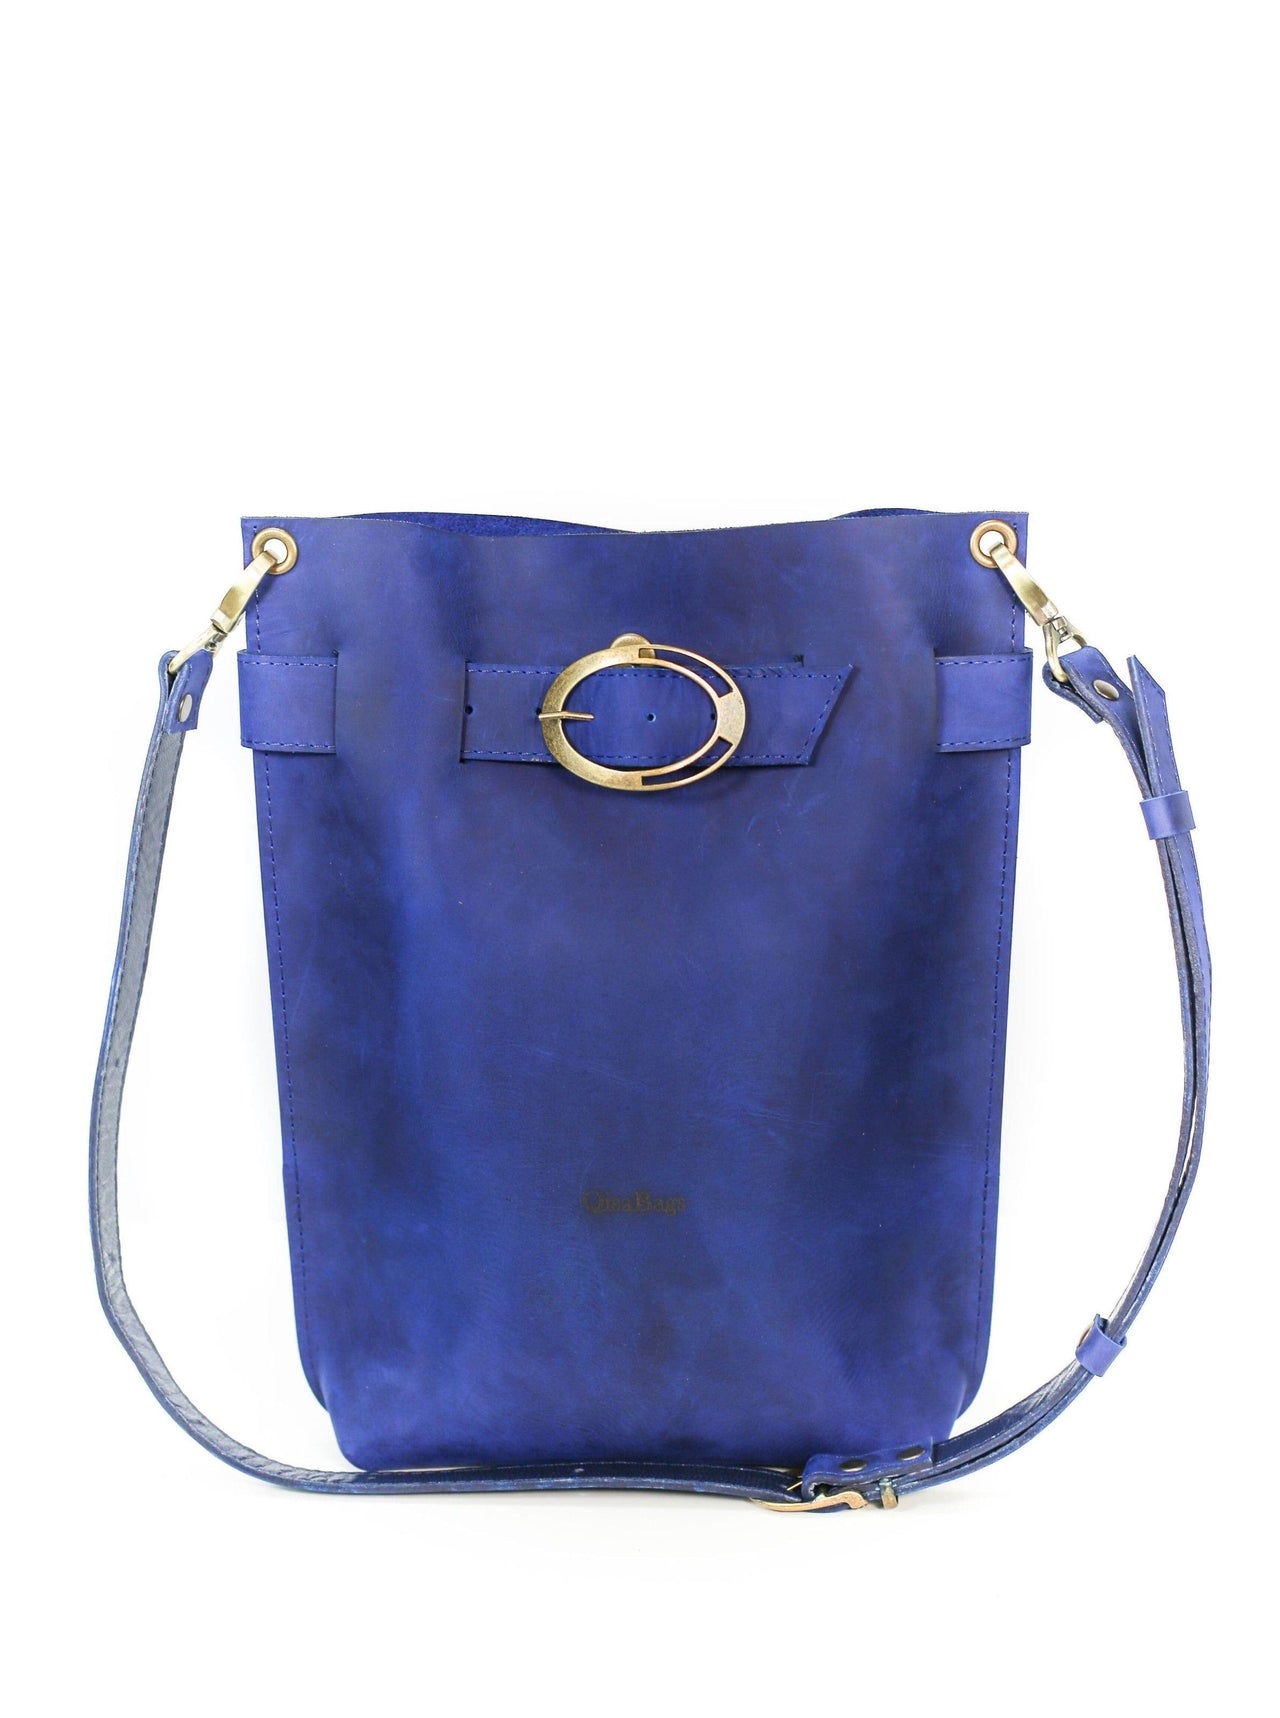 Electric blue leather bag